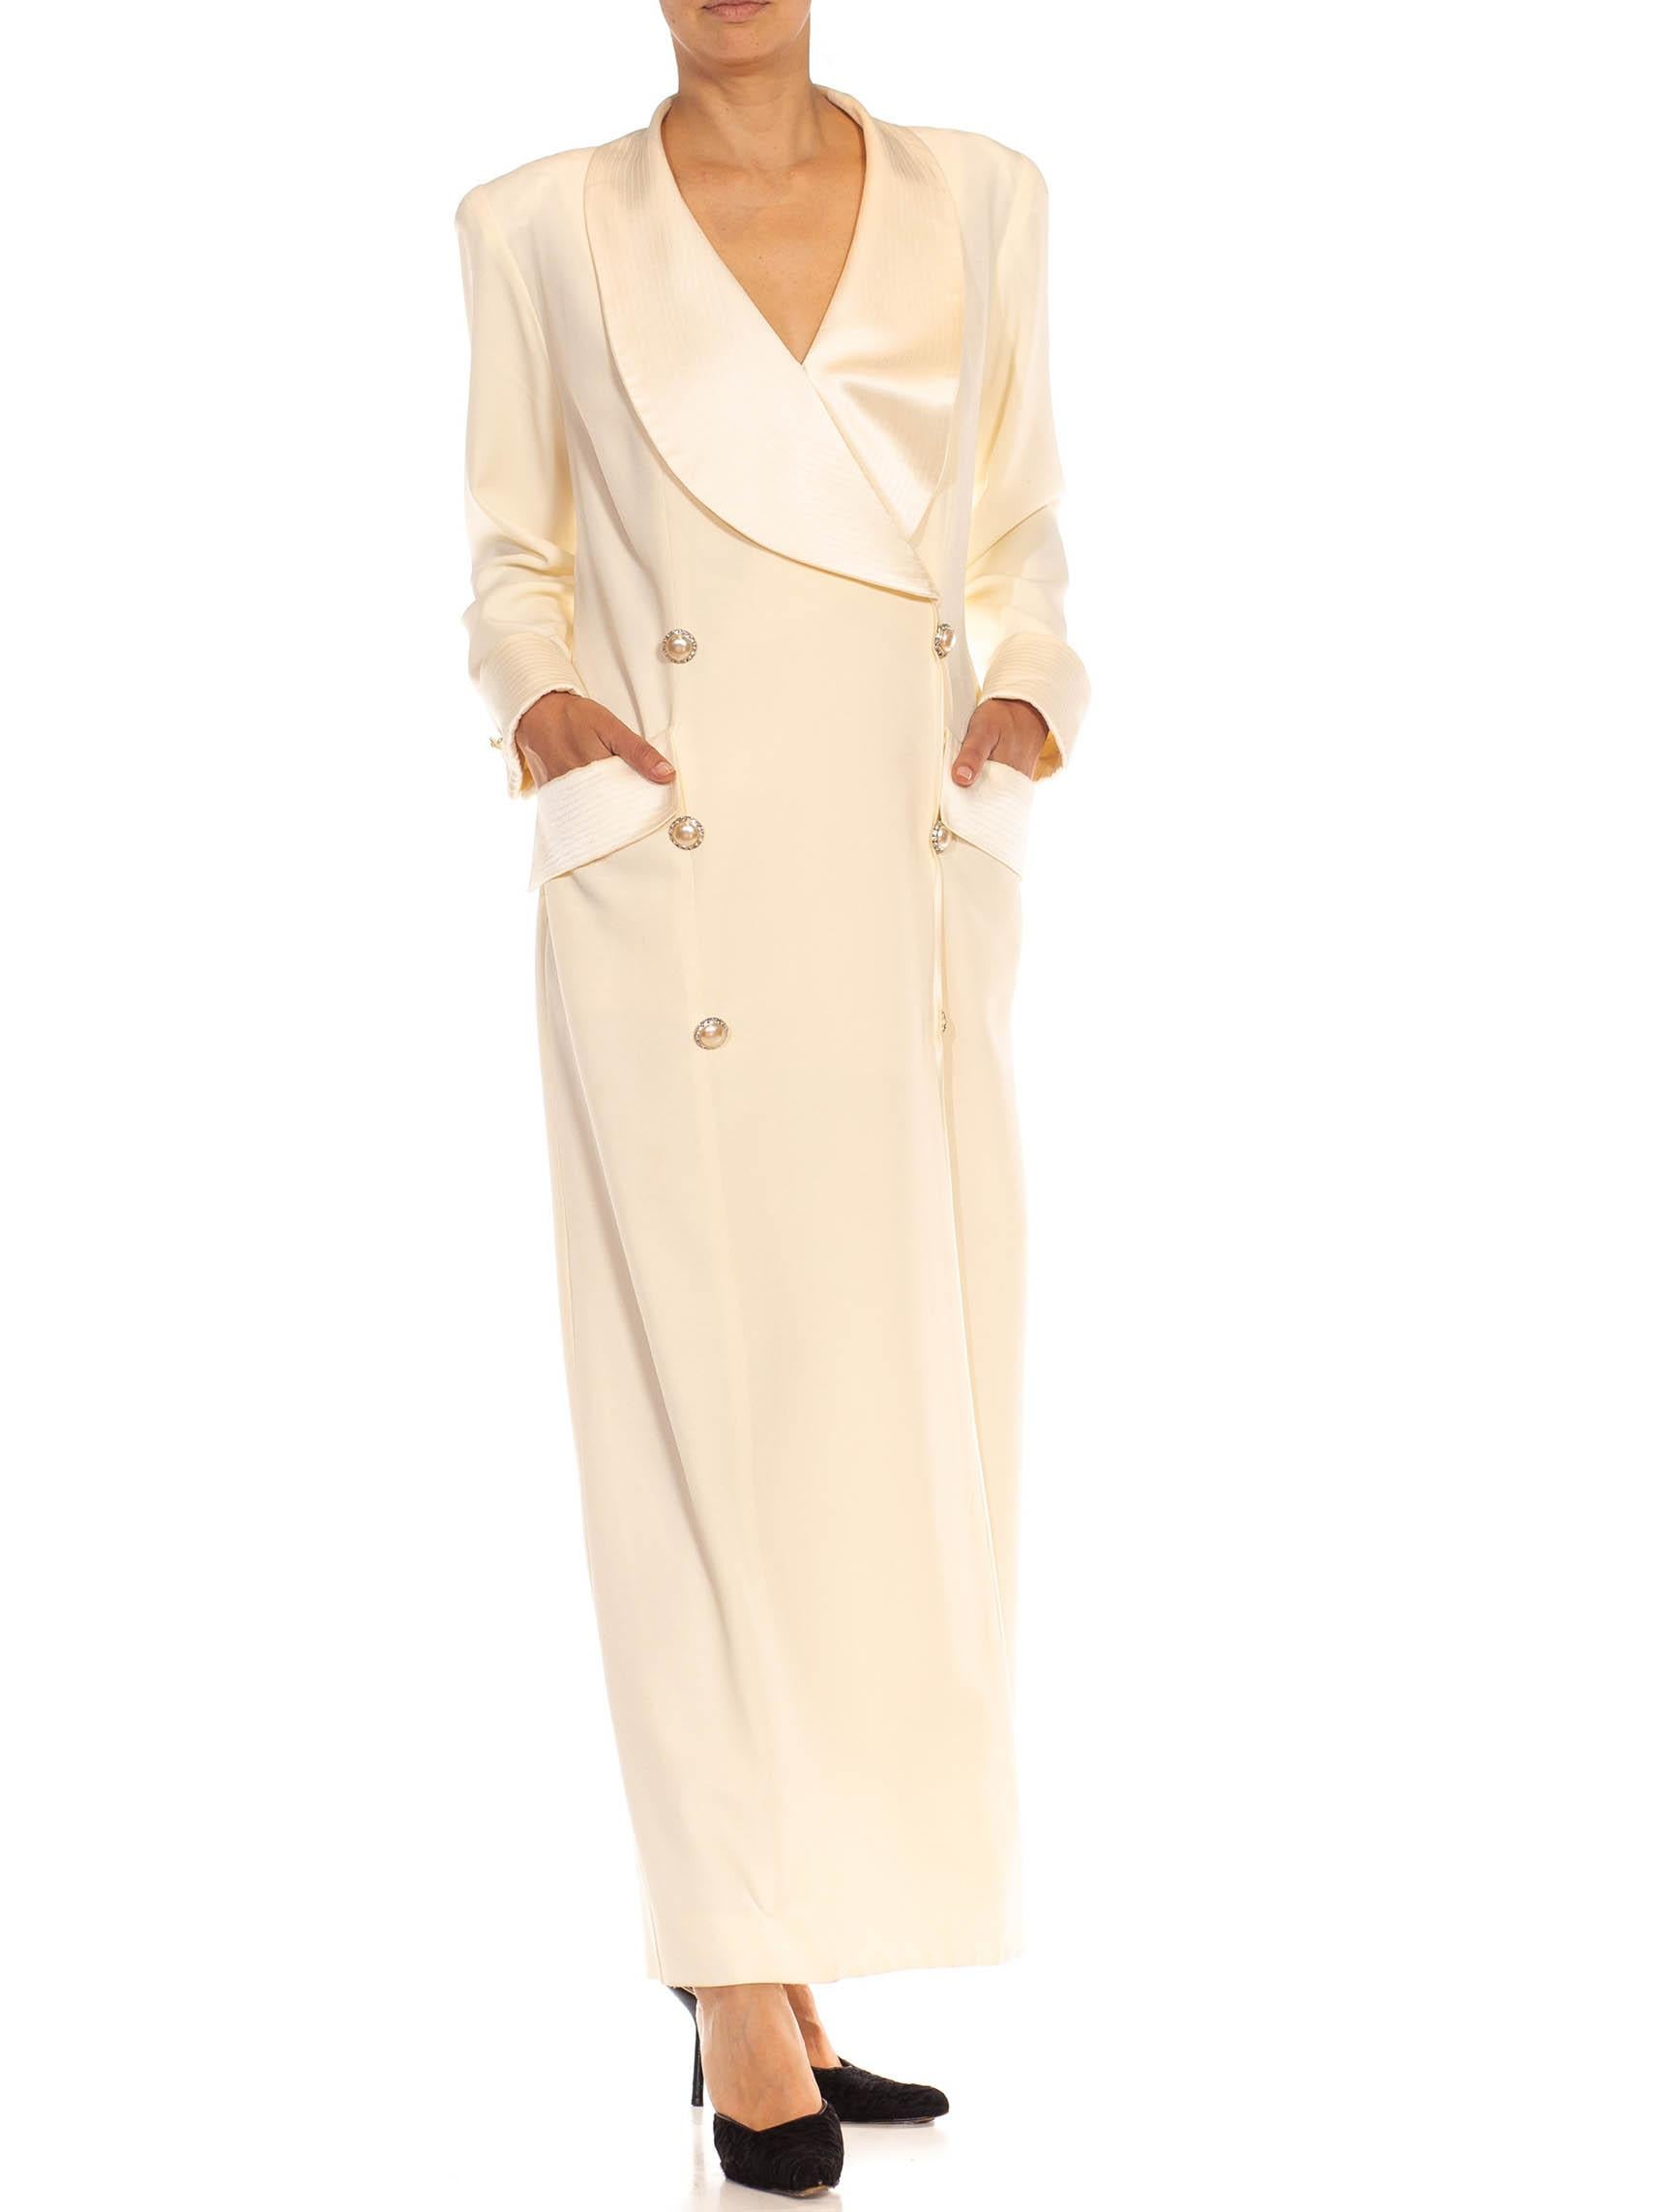 Women's 1980S Cream Polyester Glam Dress For Sale